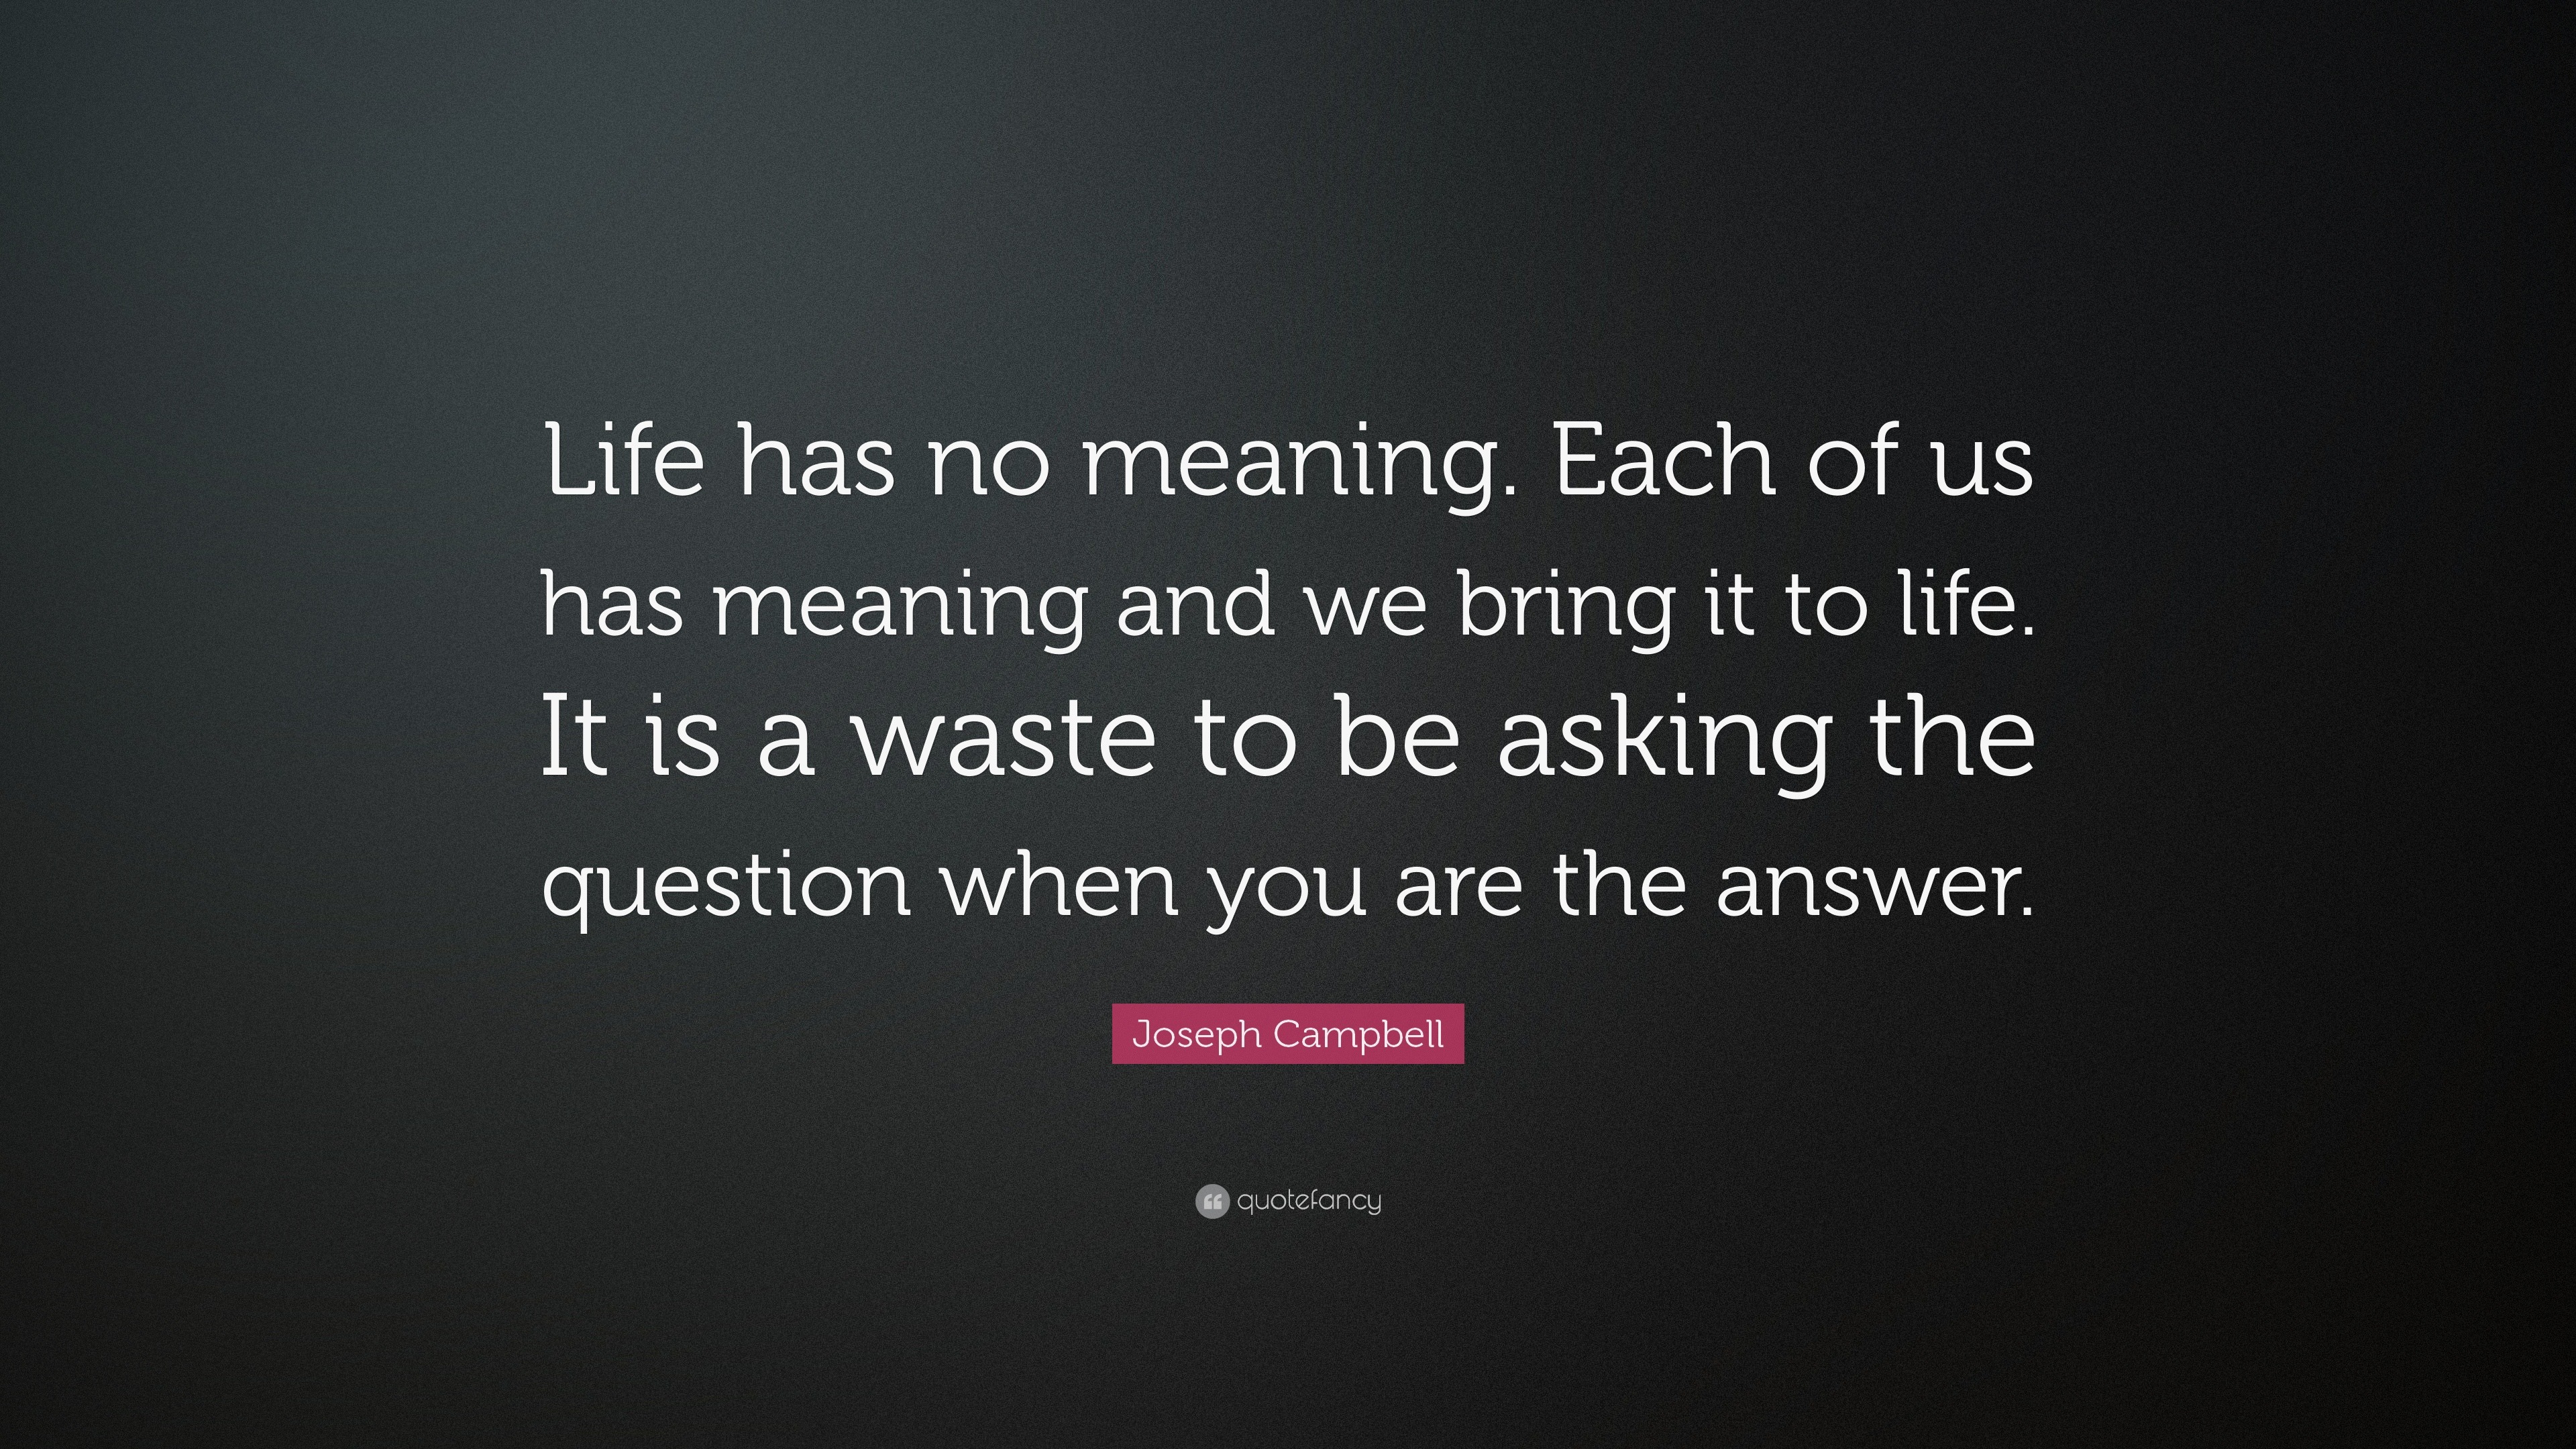 8674 Joseph Campbell Quote Life has no meaning Each of us has meaning